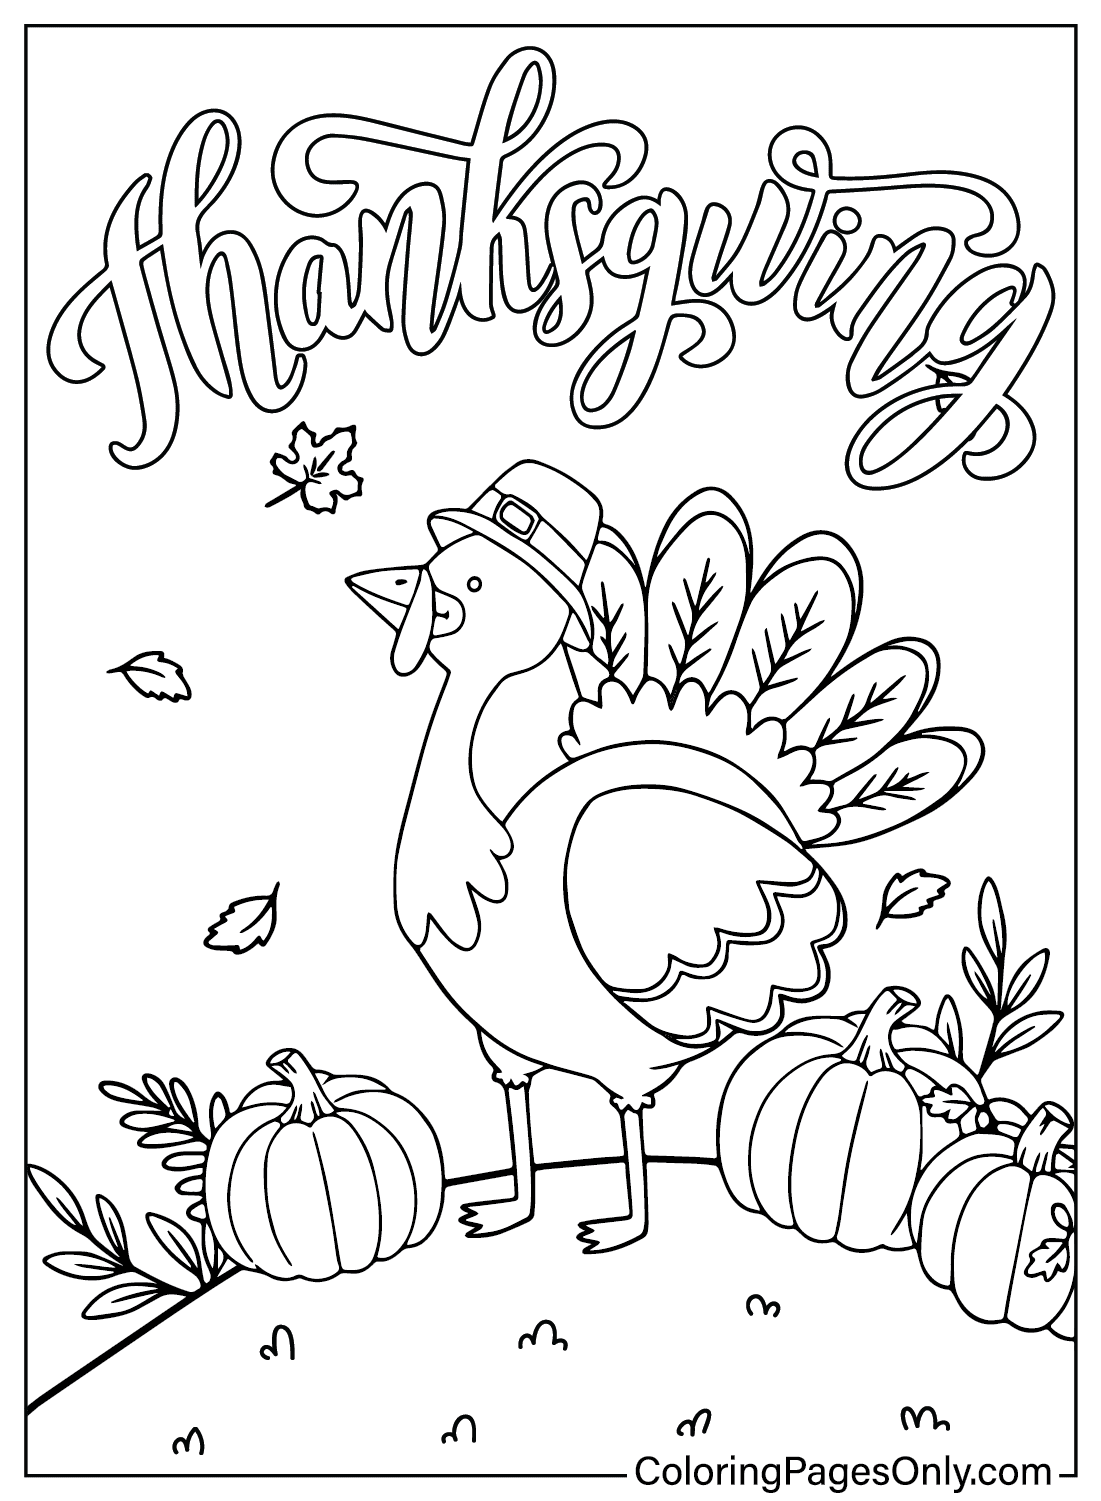 Thanksgiving Cartoon Coloring Page Free from Thanksgiving Cartoon